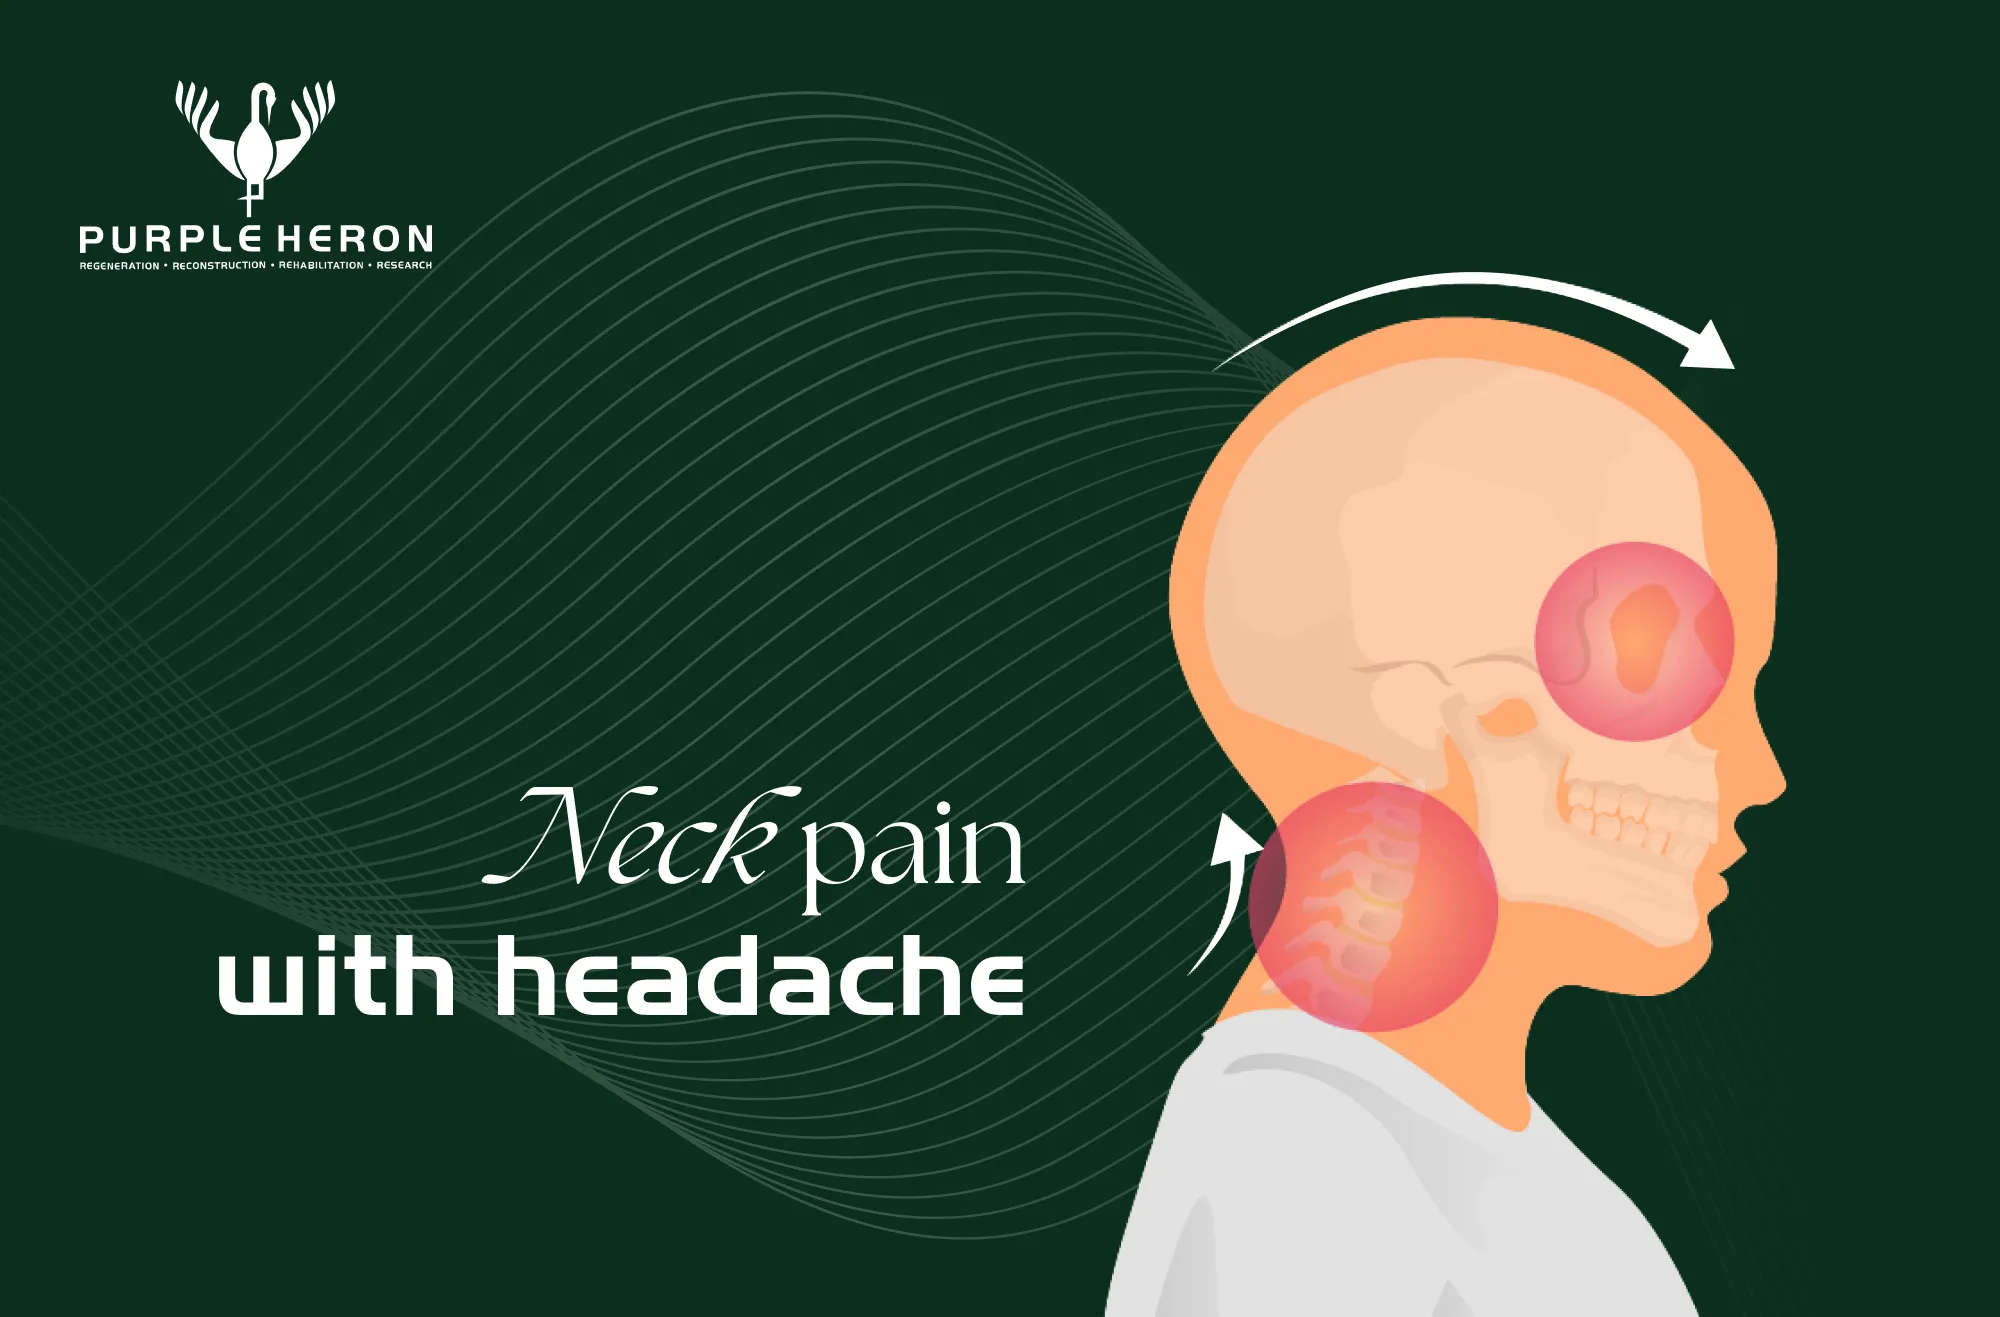 Neck pain with headache image